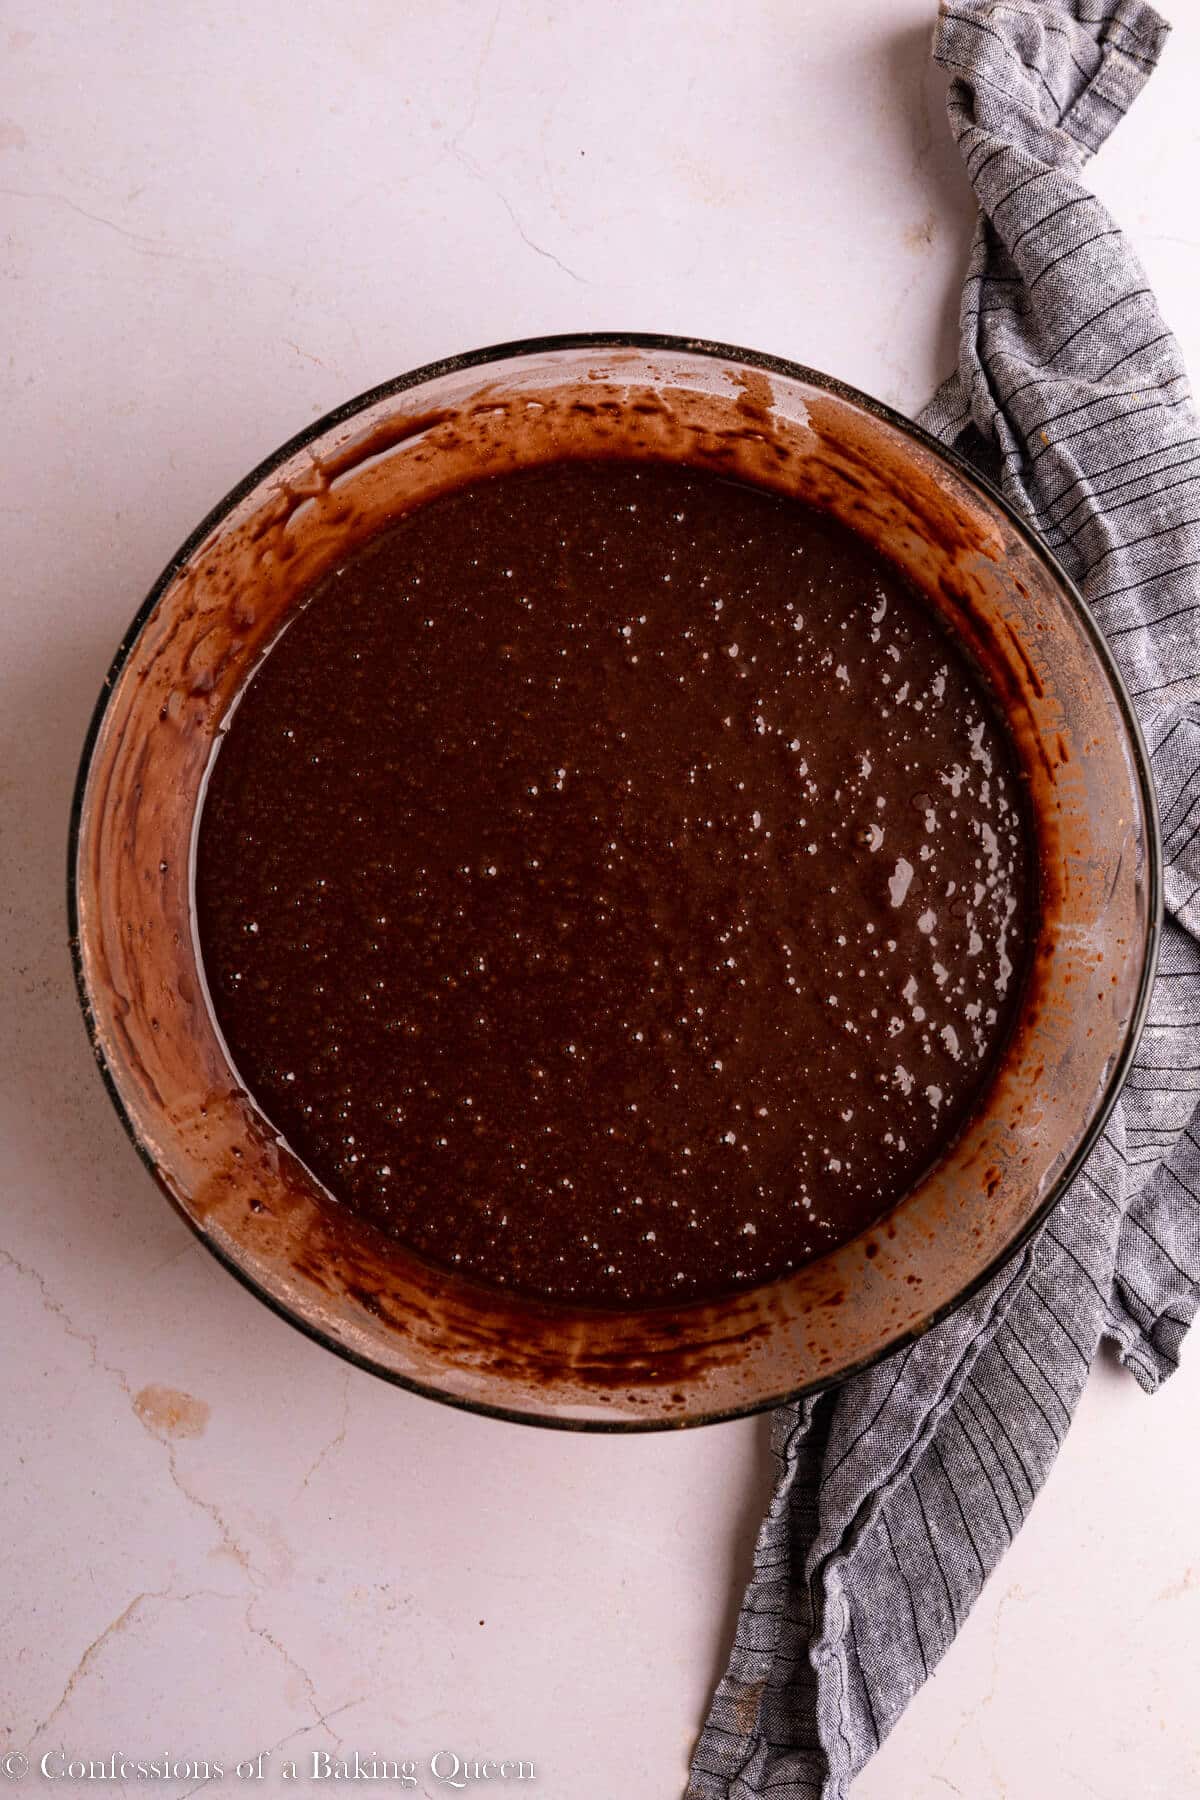 chocolate cake batter in a glass bowl on a light surface with a blue linen